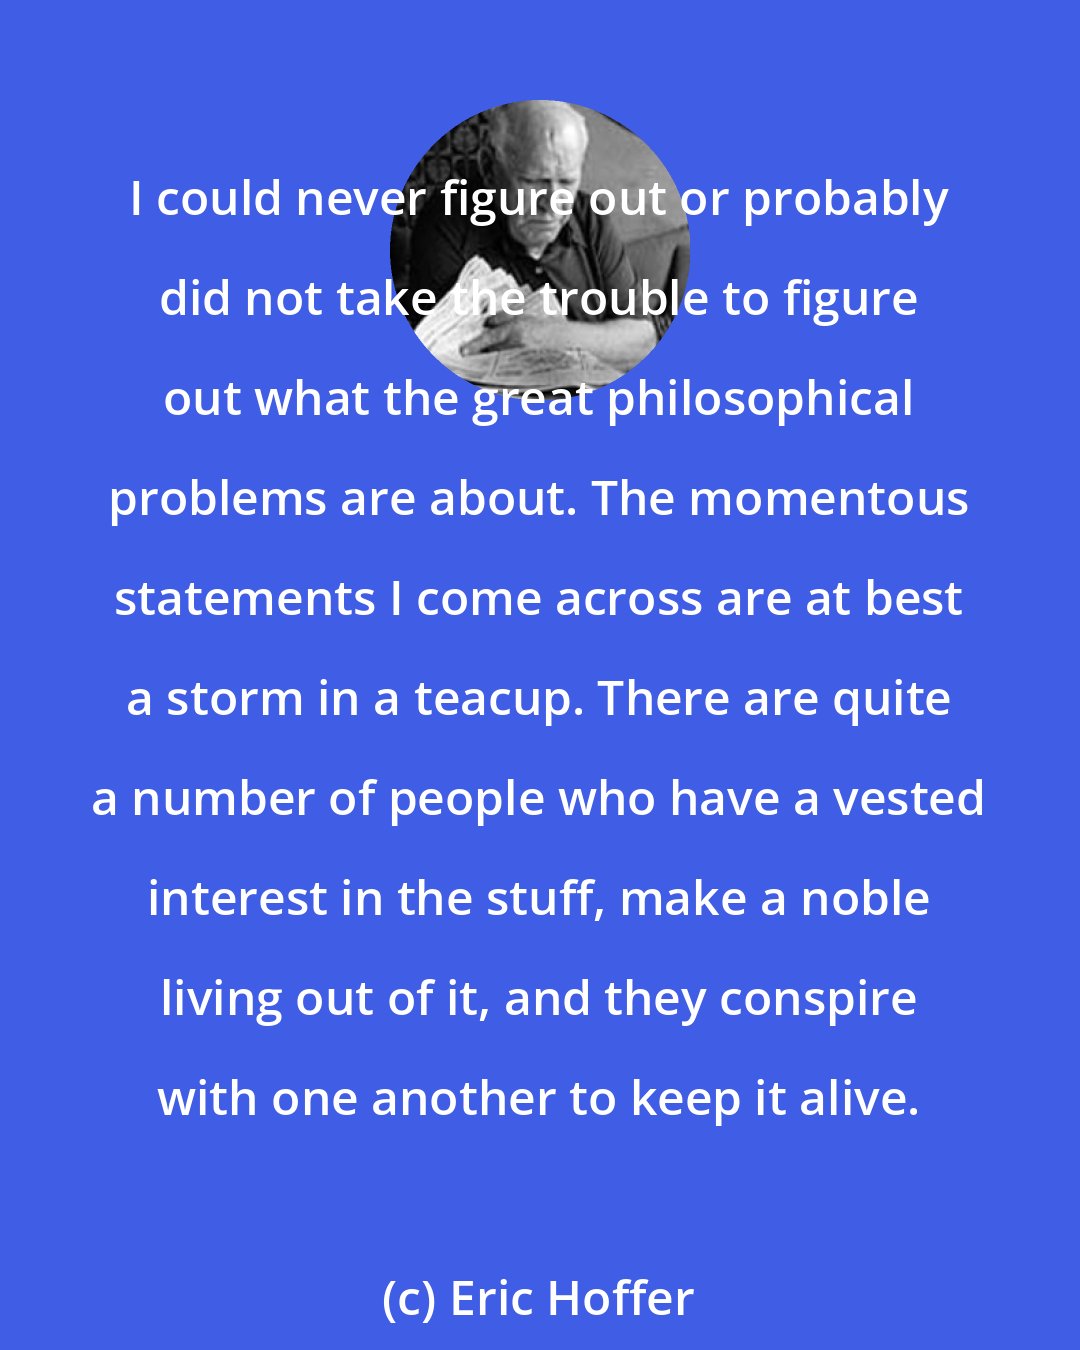 Eric Hoffer: I could never figure out or probably did not take the trouble to figure out what the great philosophical problems are about. The momentous statements I come across are at best a storm in a teacup. There are quite a number of people who have a vested interest in the stuff, make a noble living out of it, and they conspire with one another to keep it alive.